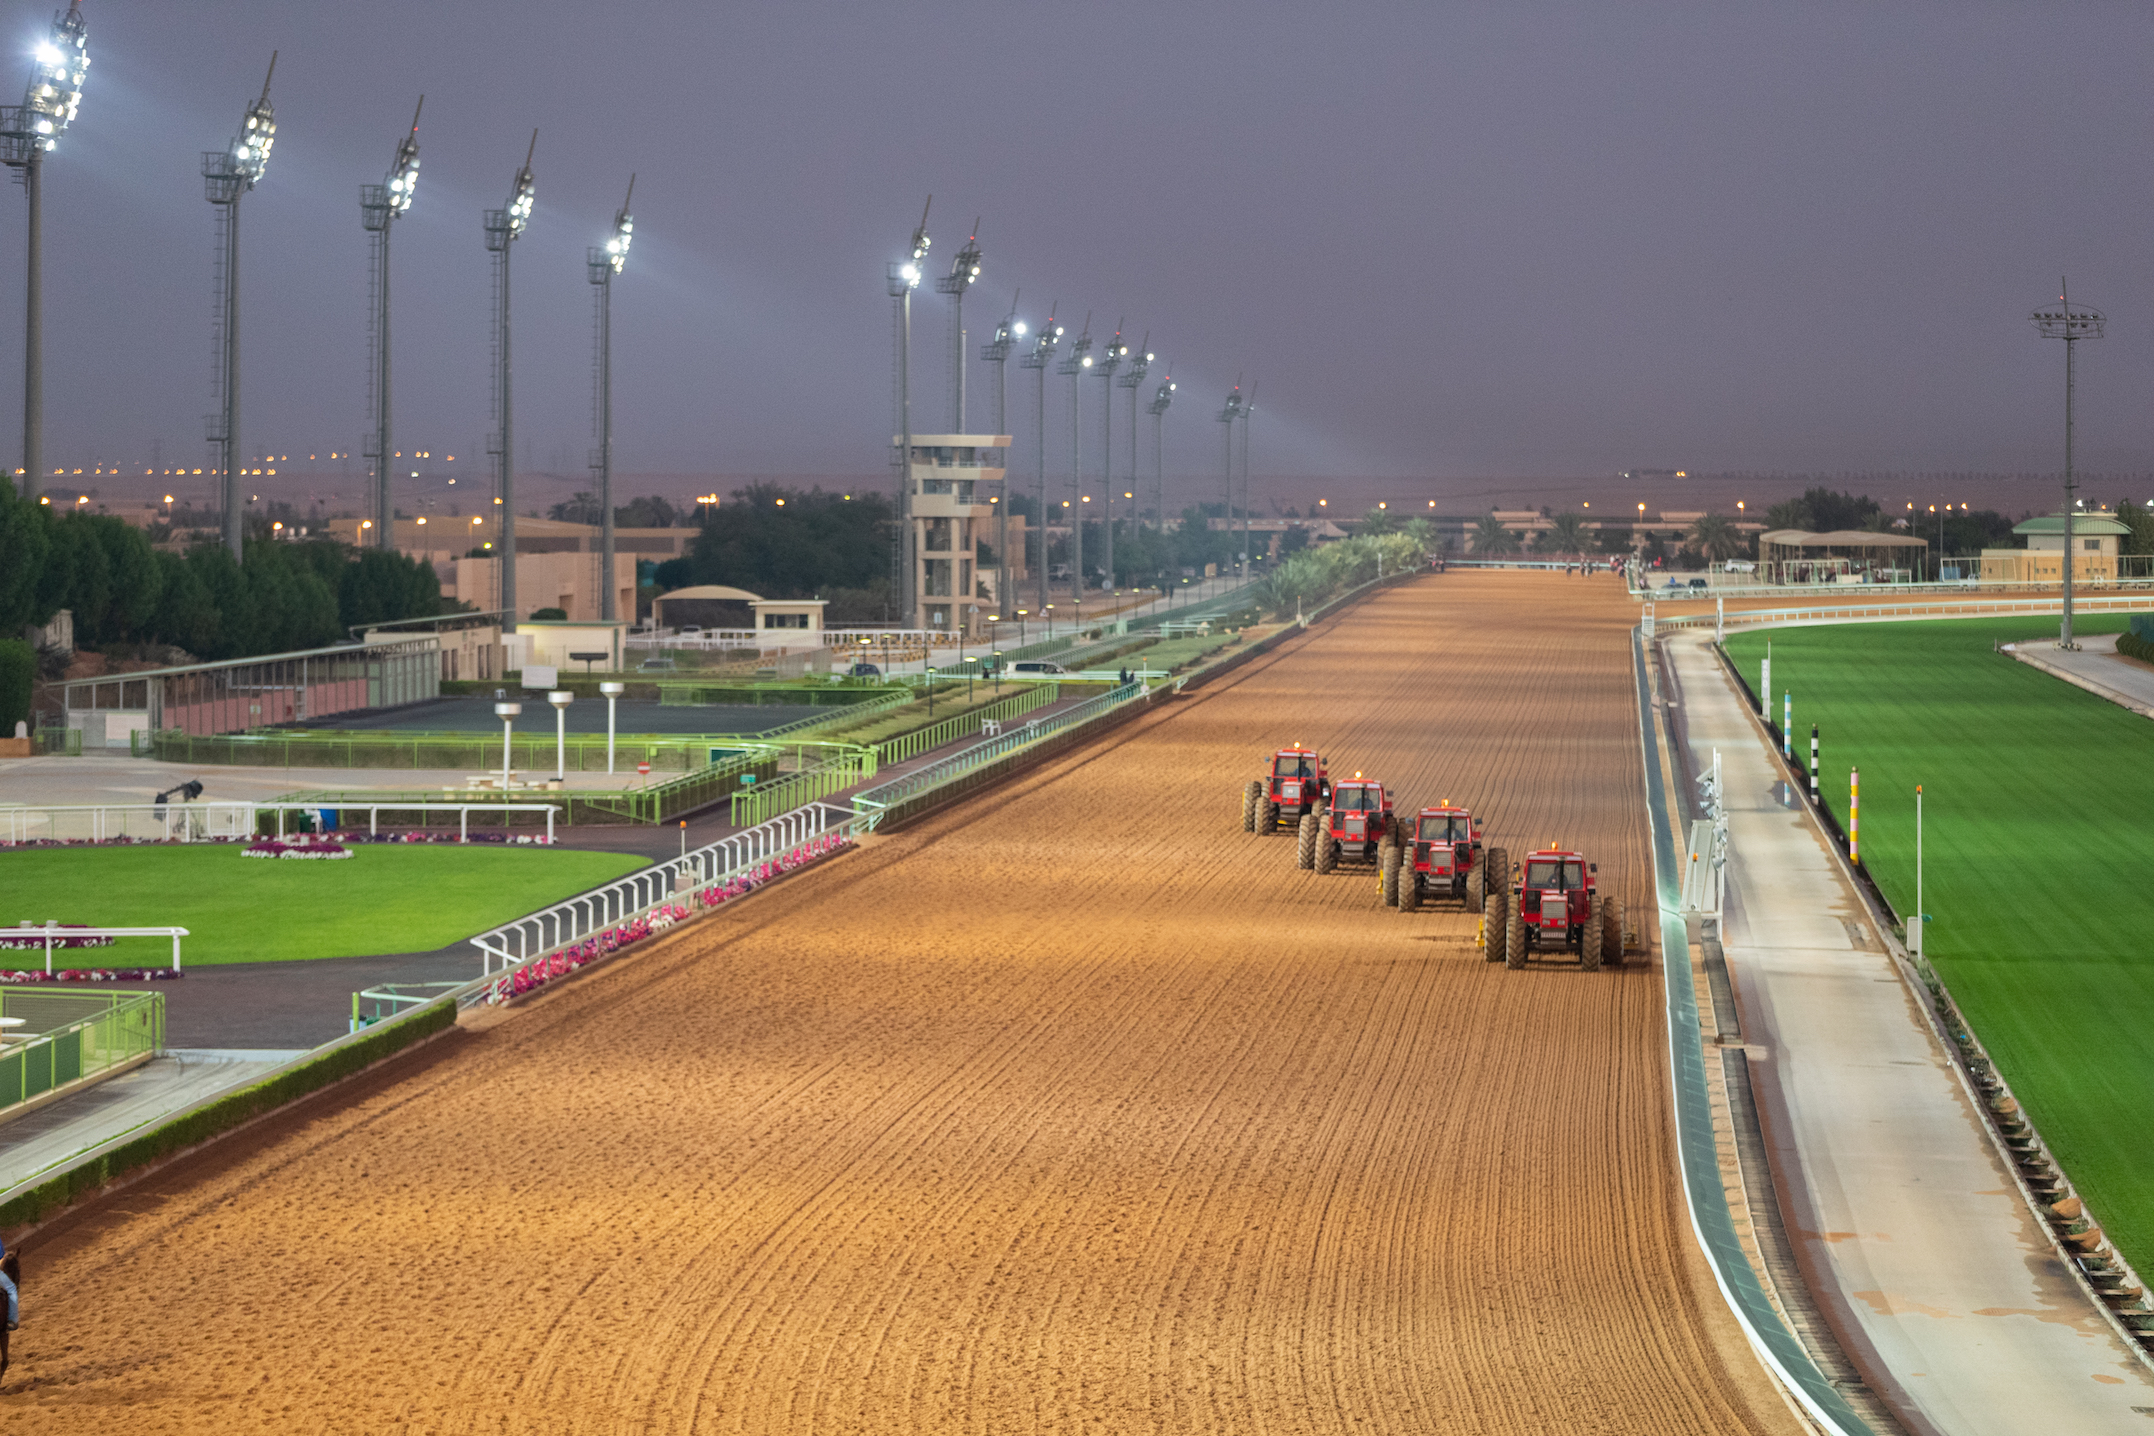 Impressive progress is being made on all aspects of the King Abdulaziz Racetrack in preparation for the big event at the end of February